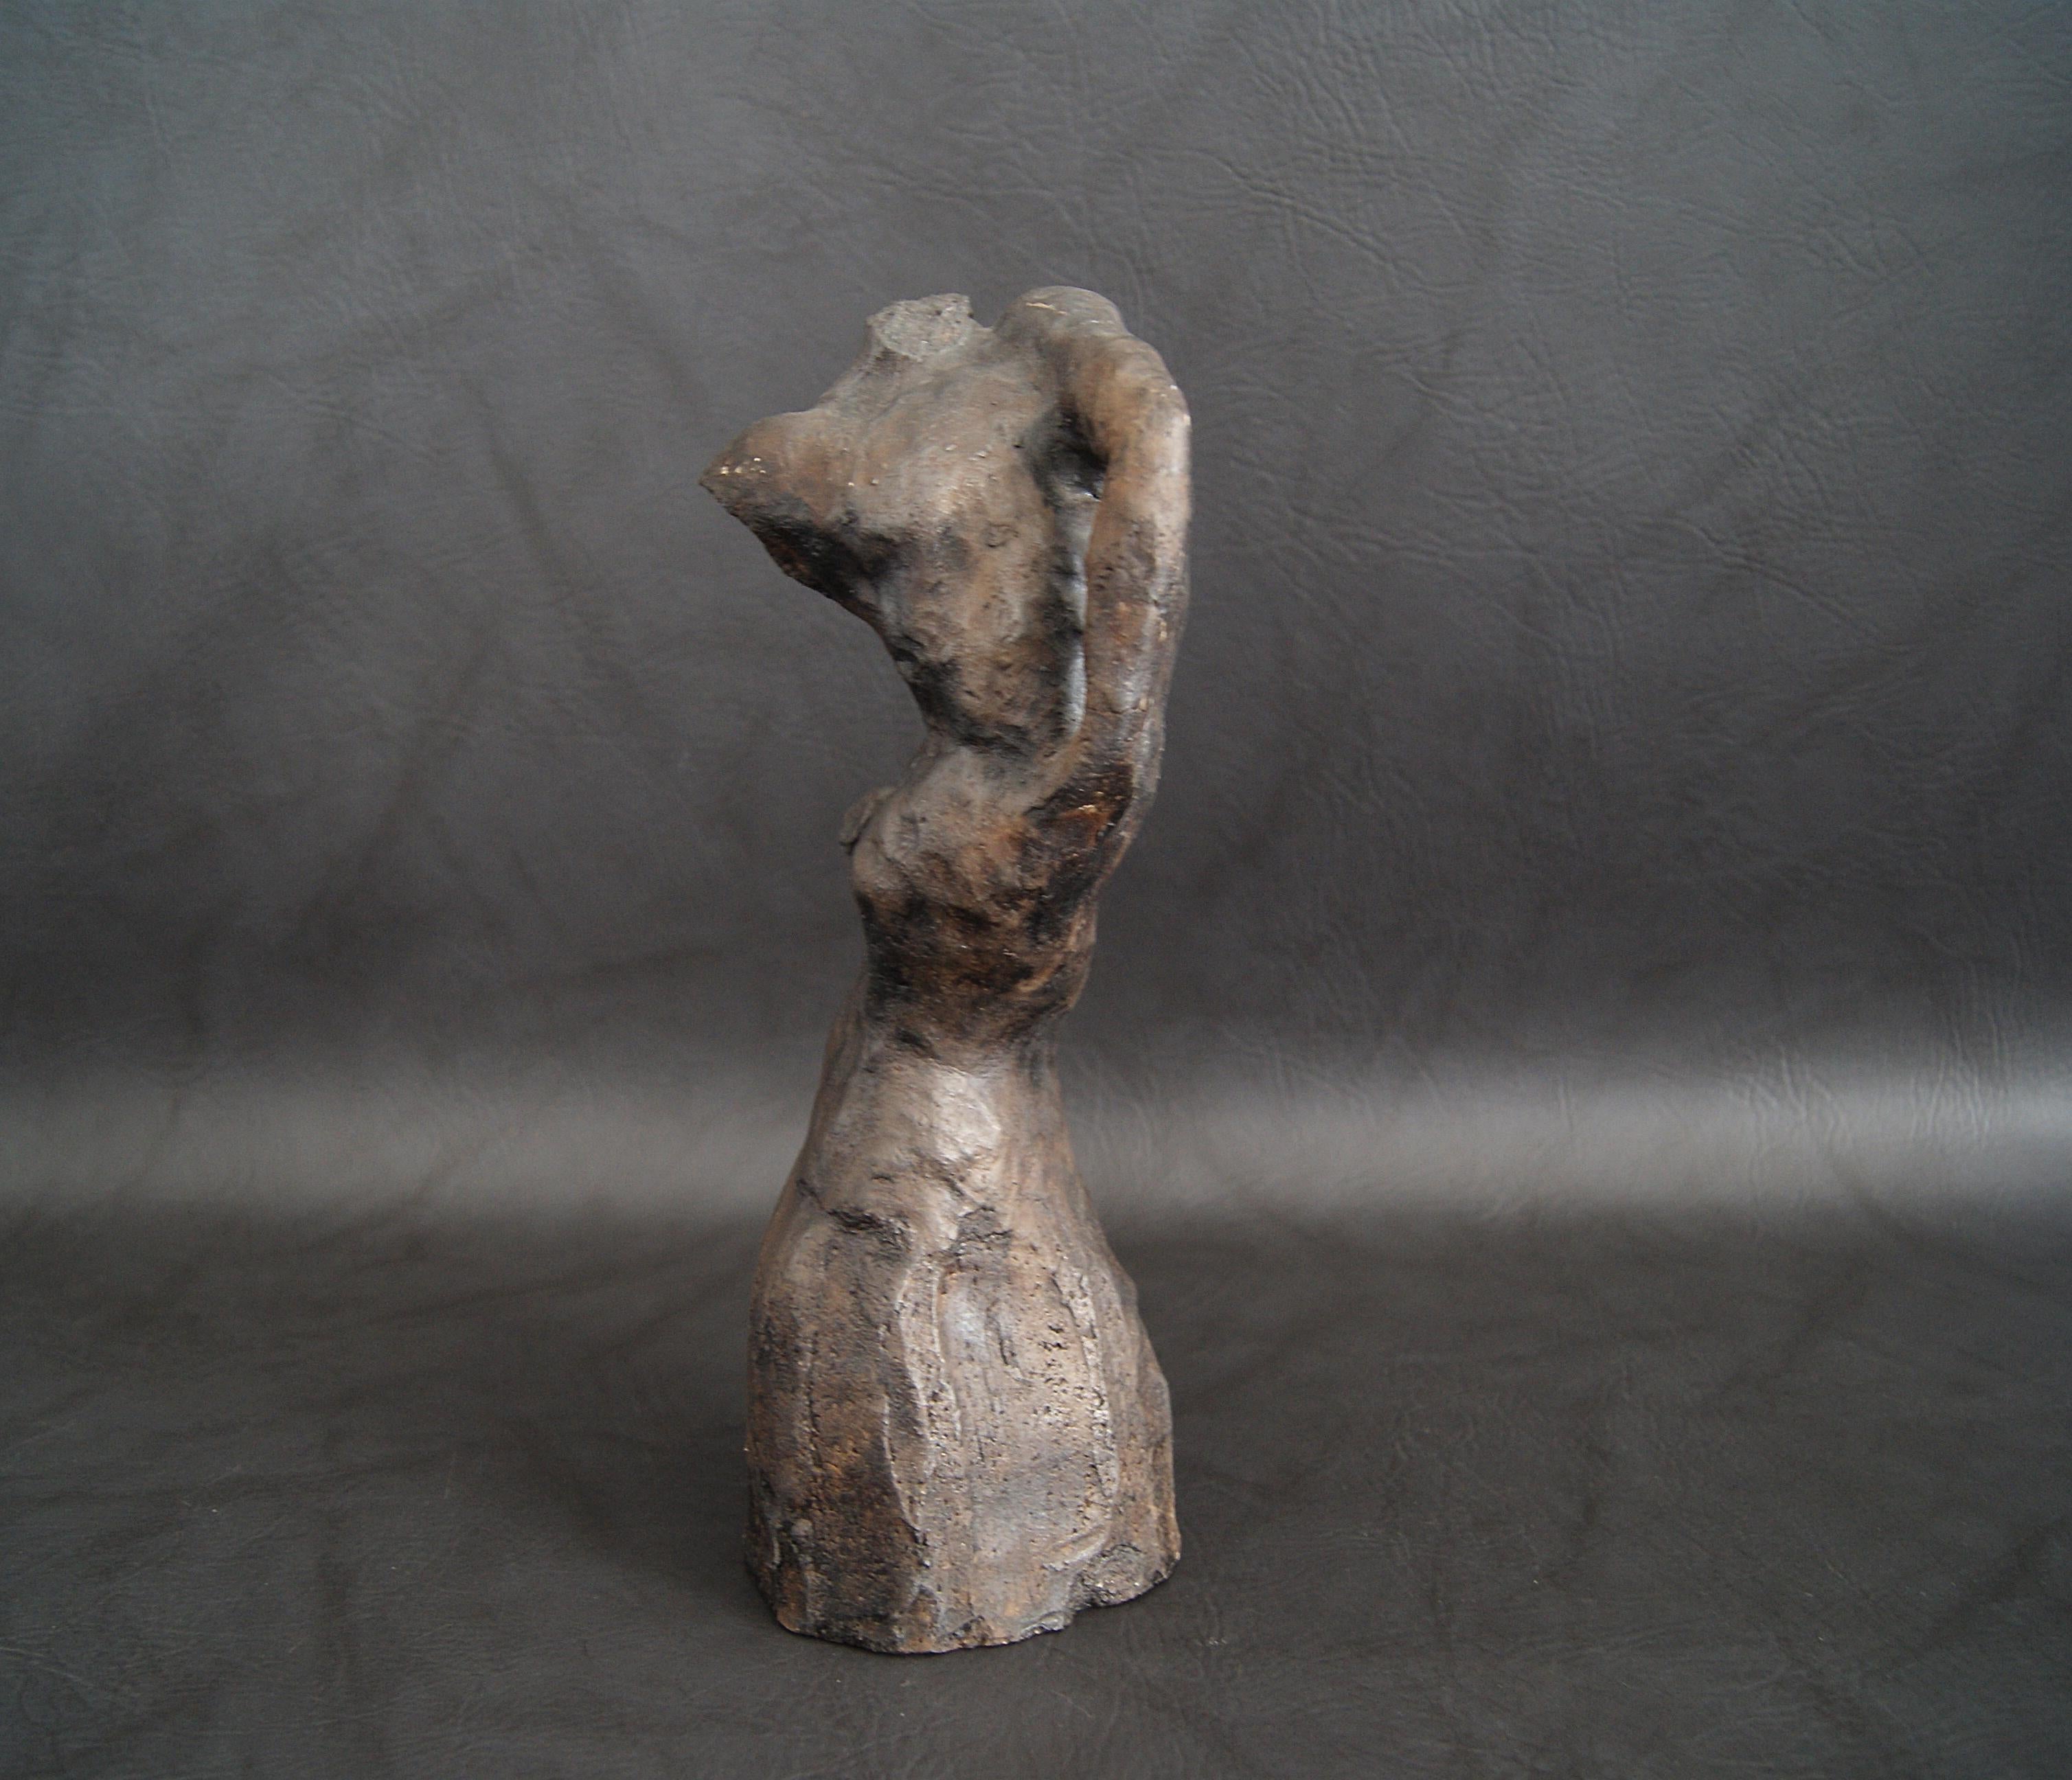 Hand-formed sculpture made of plaster of Paris with patinated bronze by the German artist TADÄUS from the series formless body shapes from 2002. A very decorative one-off piece that invites you to interpret. The natural materials and colors adapt to